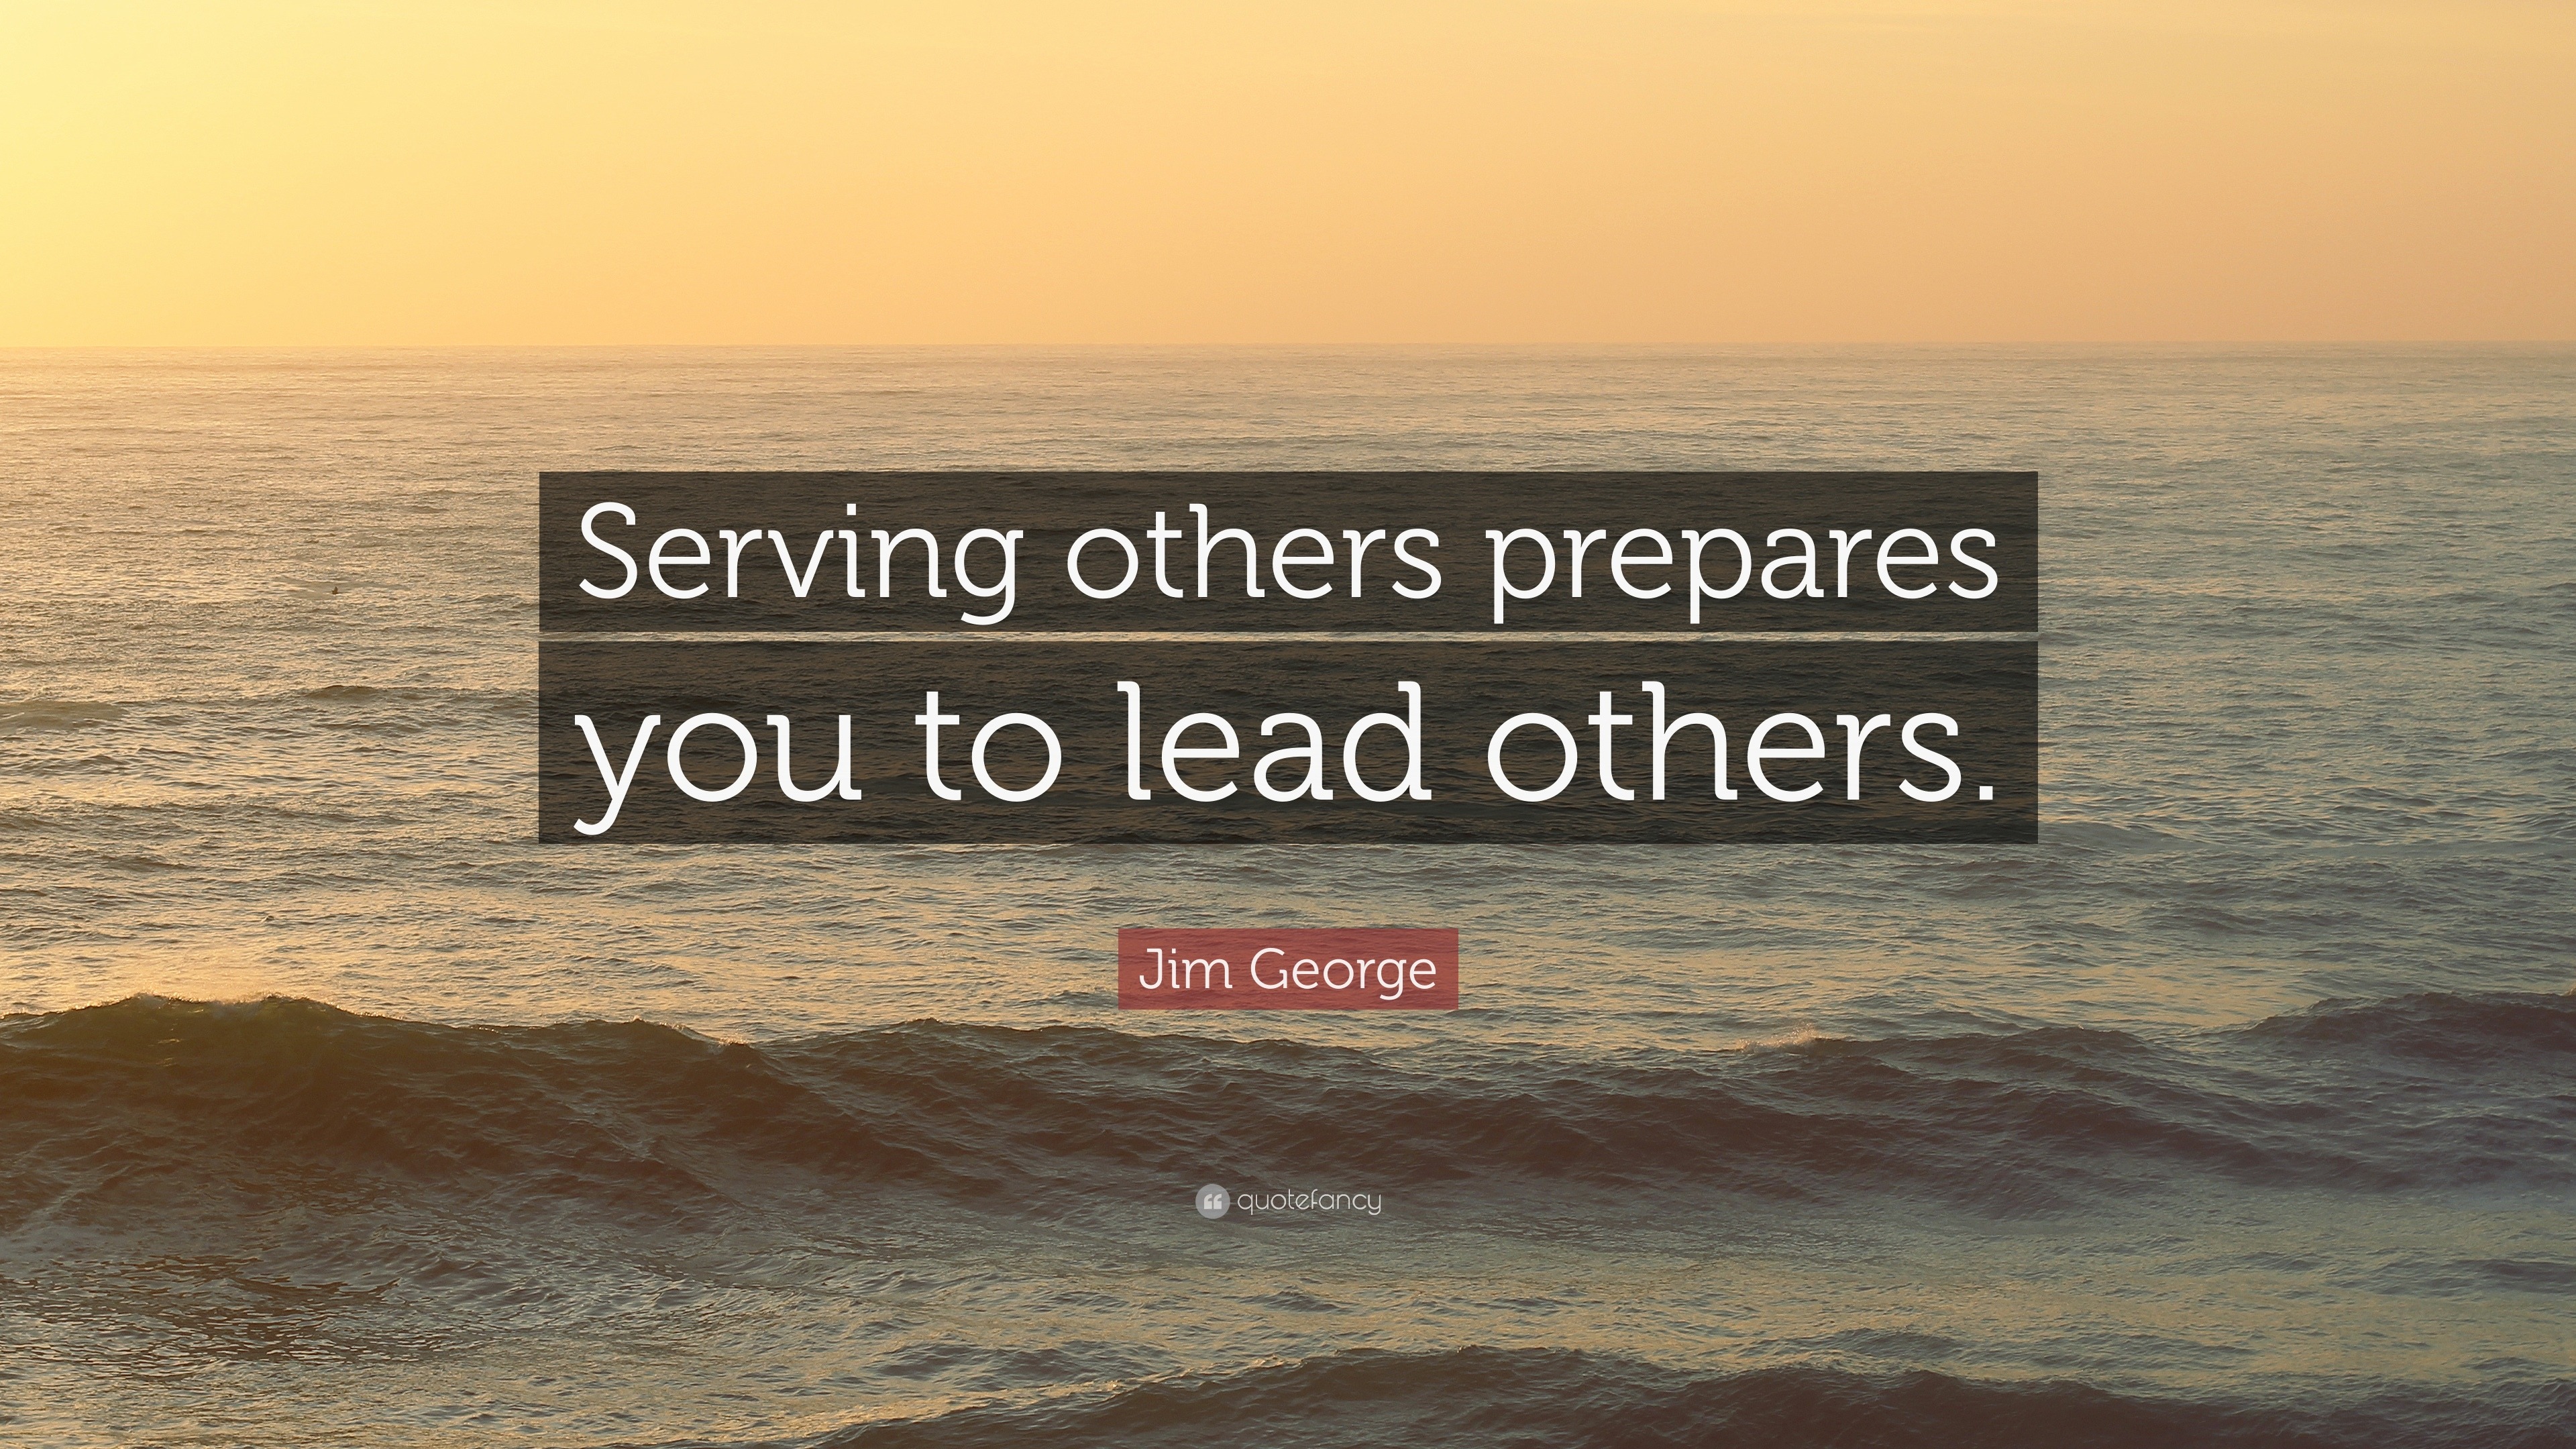 Jim Quote “Serving others prepares you to lead